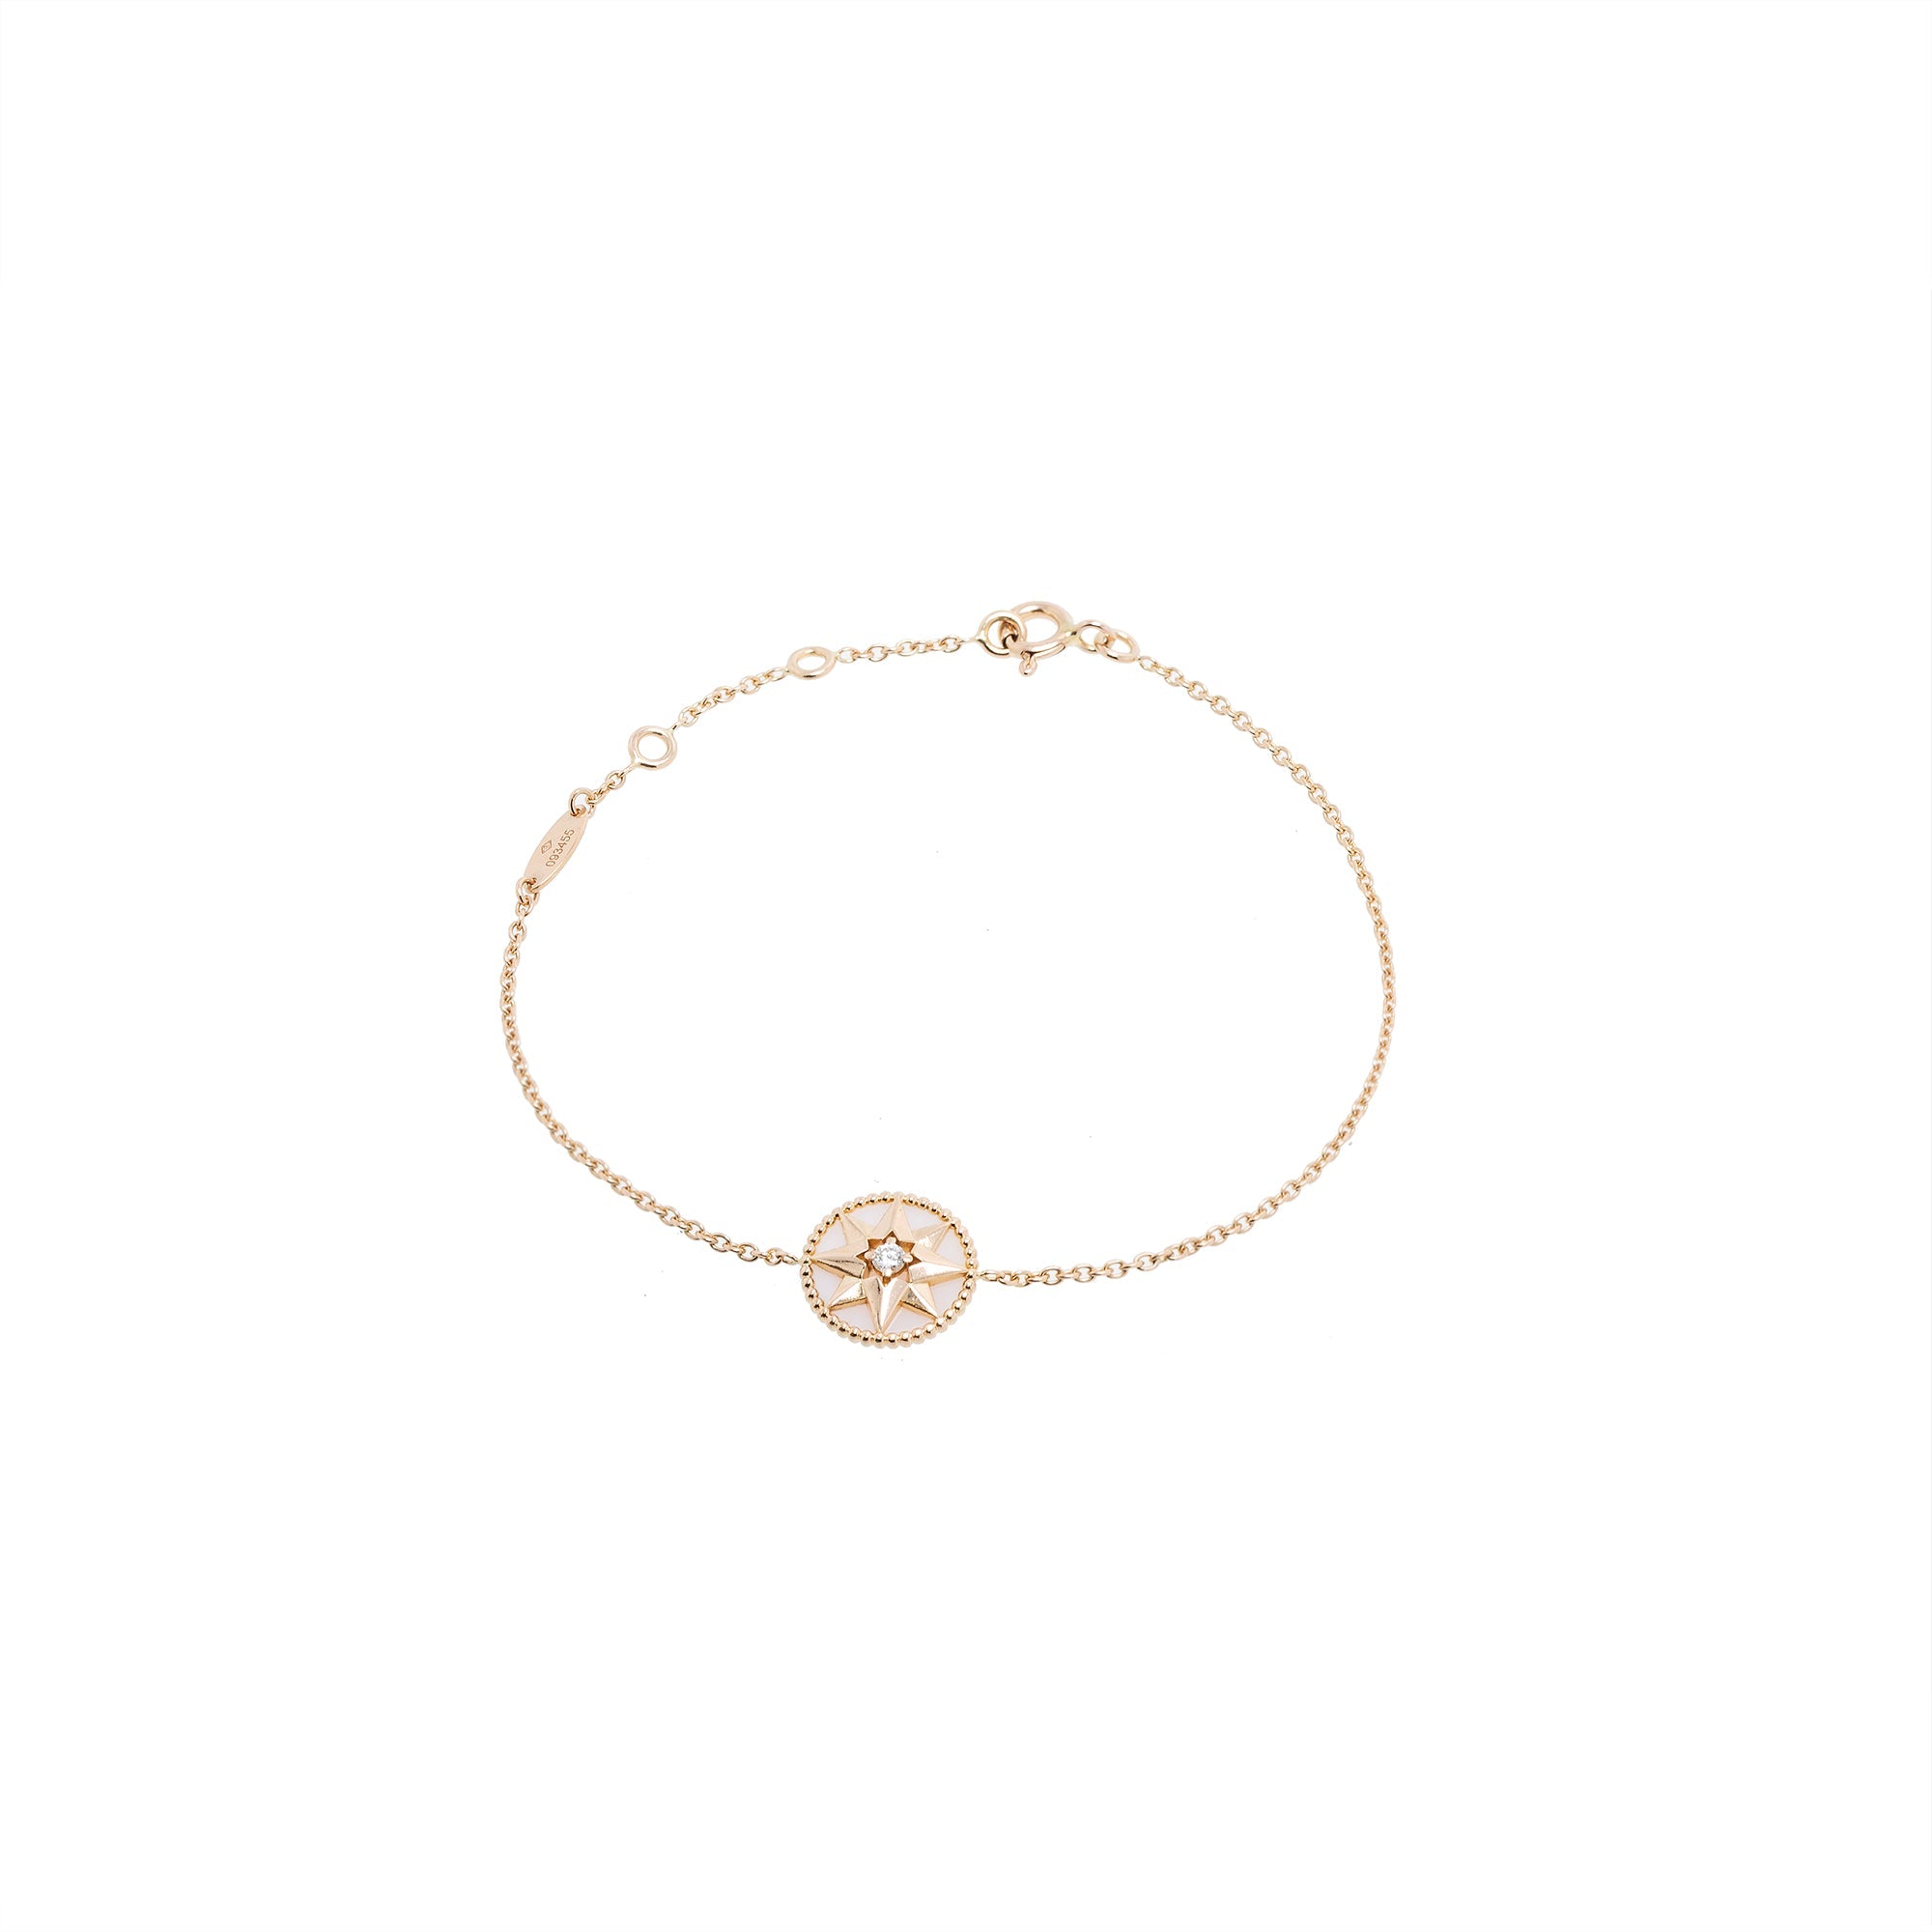 Rose Des Vents Bracelet Yellow, Pink and White Gold, Diamonds and